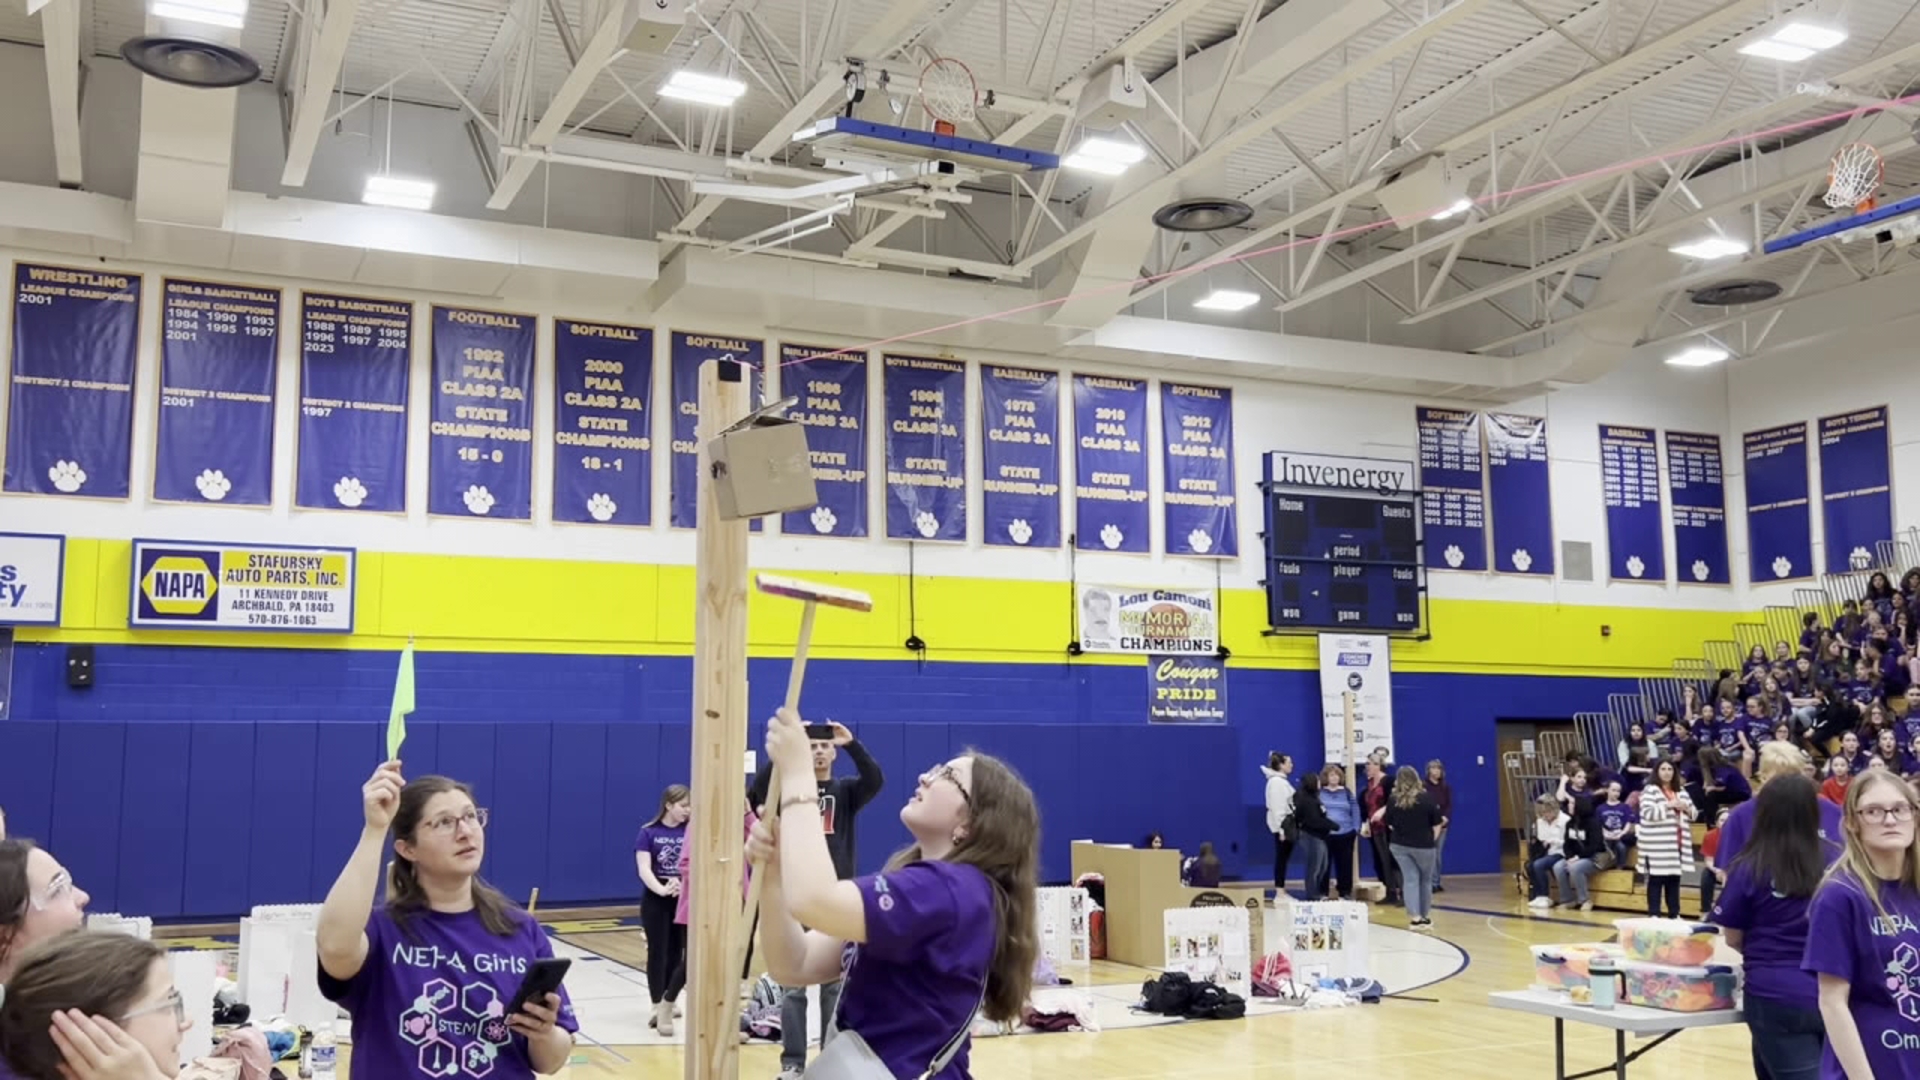 It was a competition of science, technology, engineering, and math in Lackawanna County on Saturday.